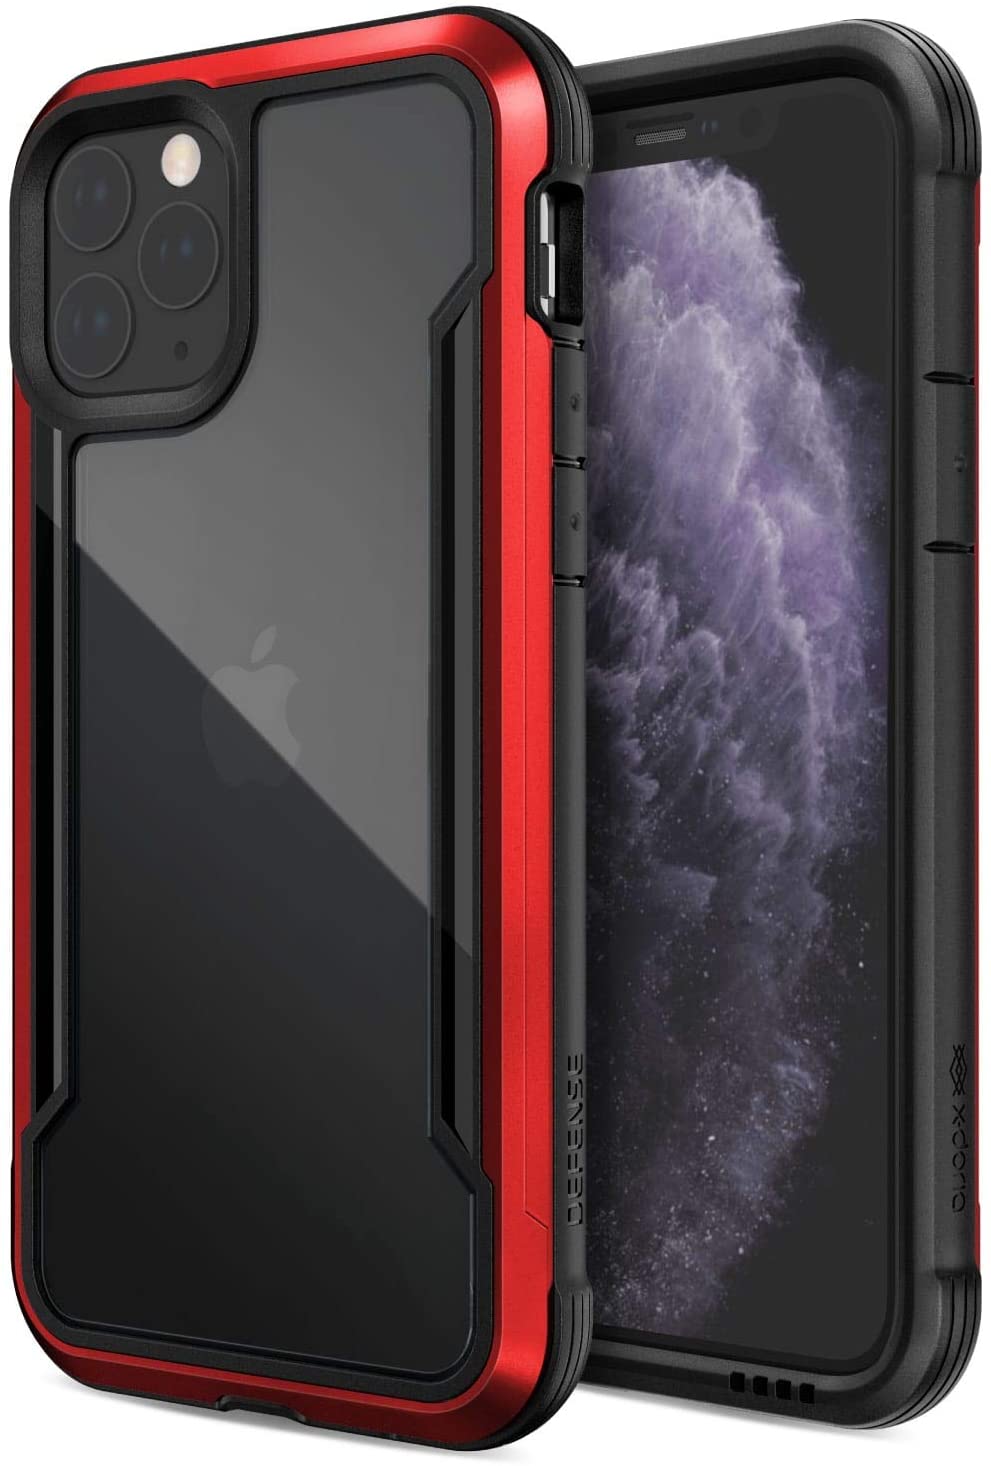 X-Doria Defense Shield, iPhone 11 Case - Military Grade Drop Tested, CNC Anodized Aluminum Metal, TPU, and Polycarbonate Protective Case for Apple iPhone 11, (Red)